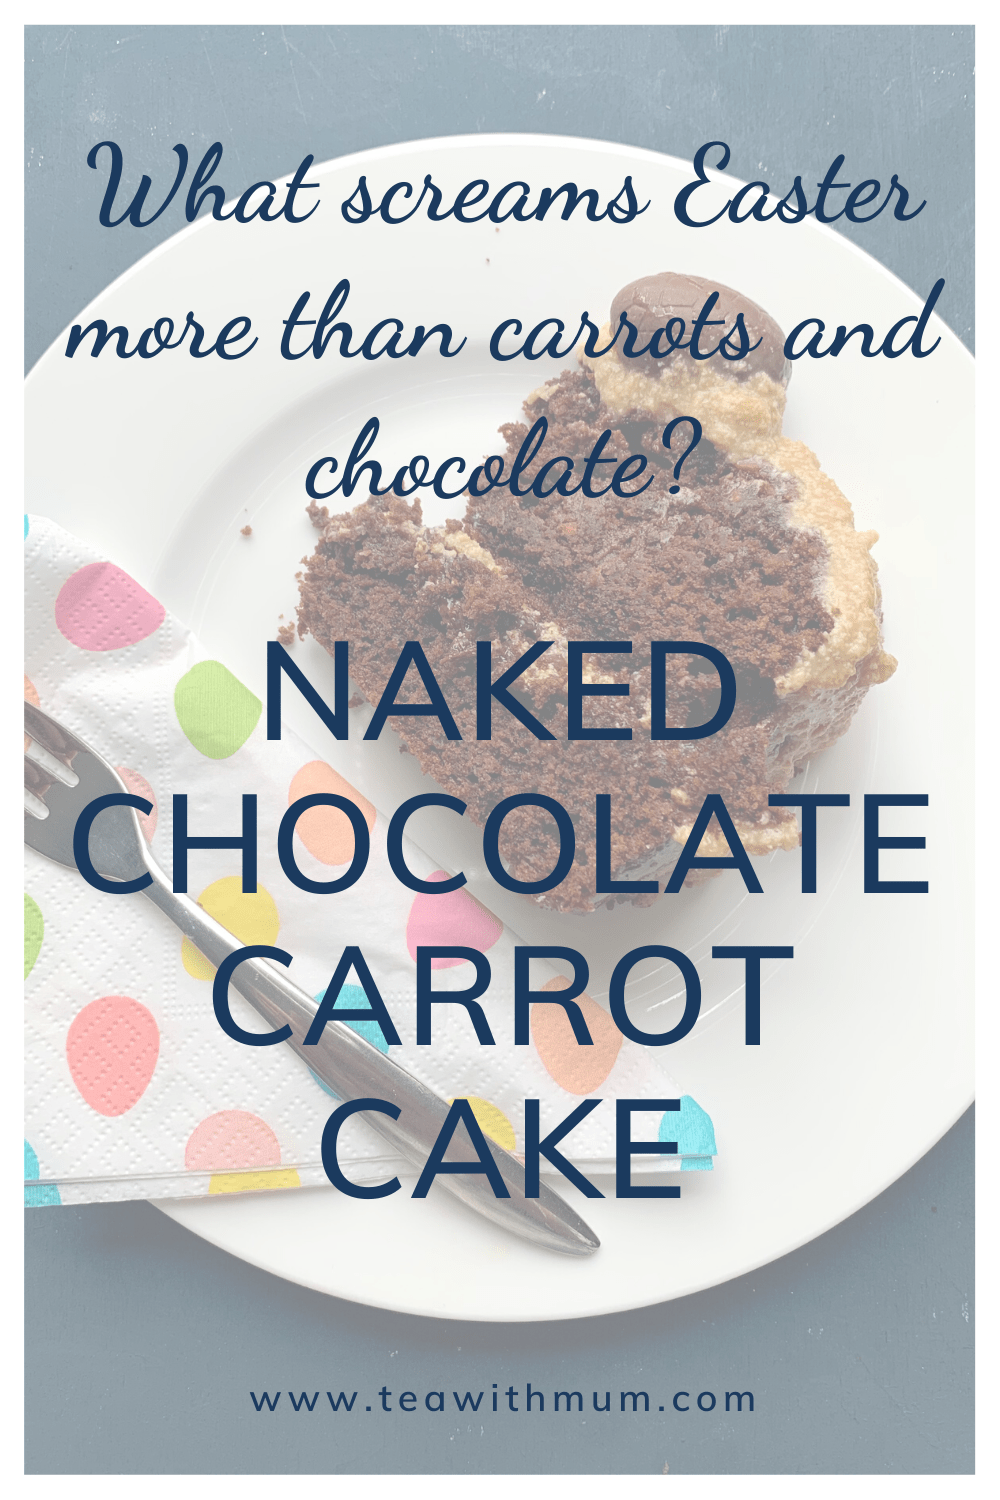 Naked chocolate carrot cake: the ultimate Easter carrot cake